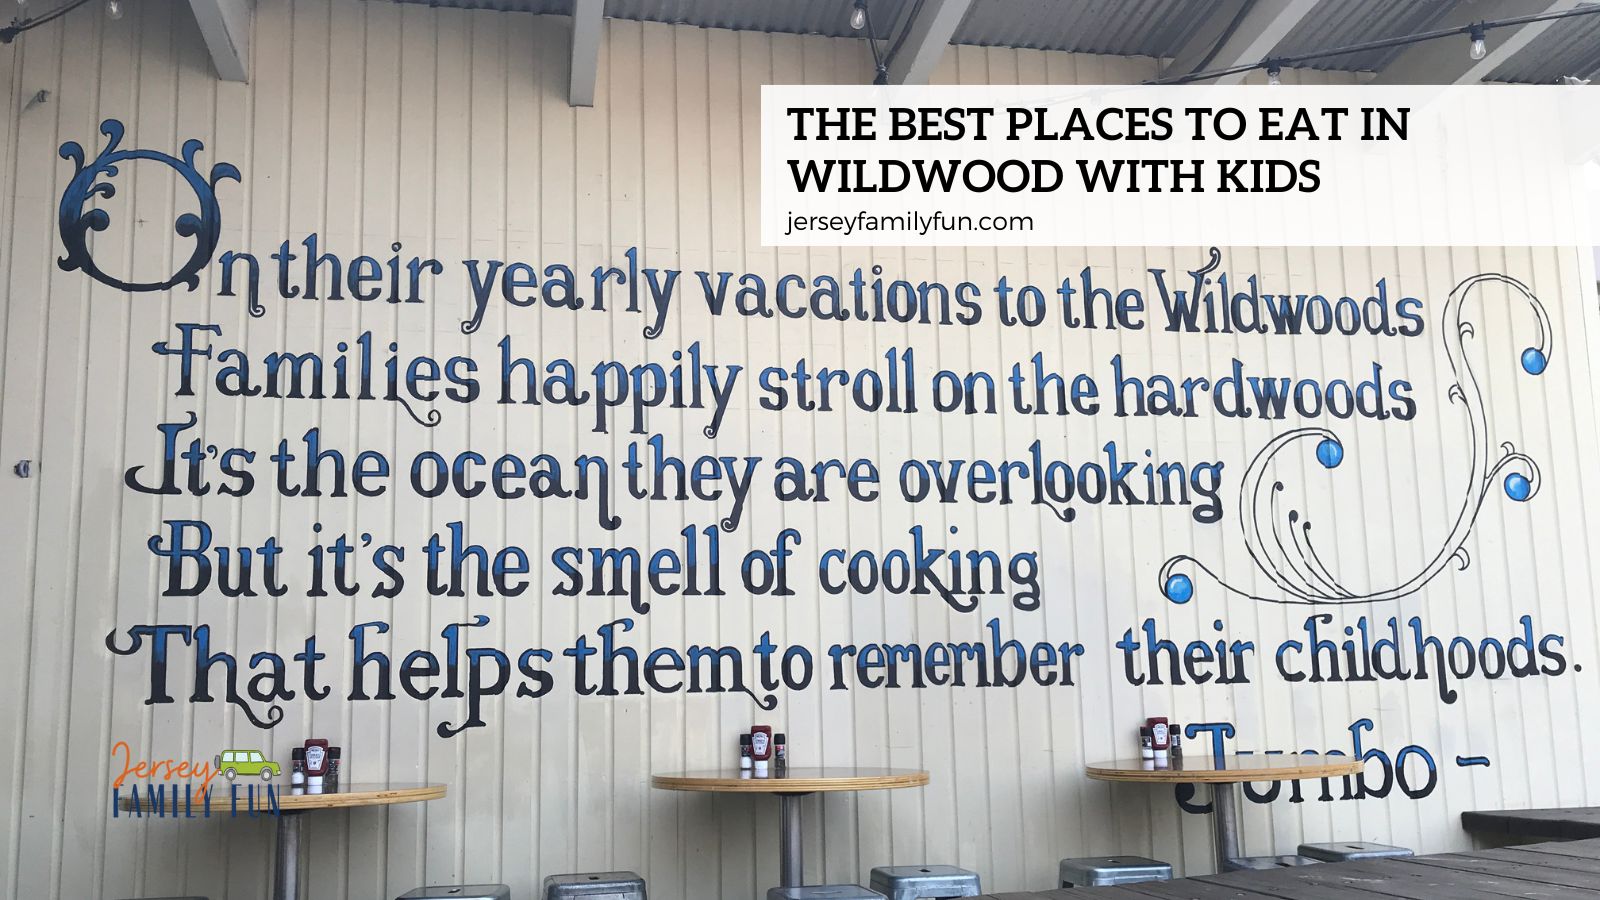 The Best Places to Eat in Wildwood with Kids WIDE IMAGE